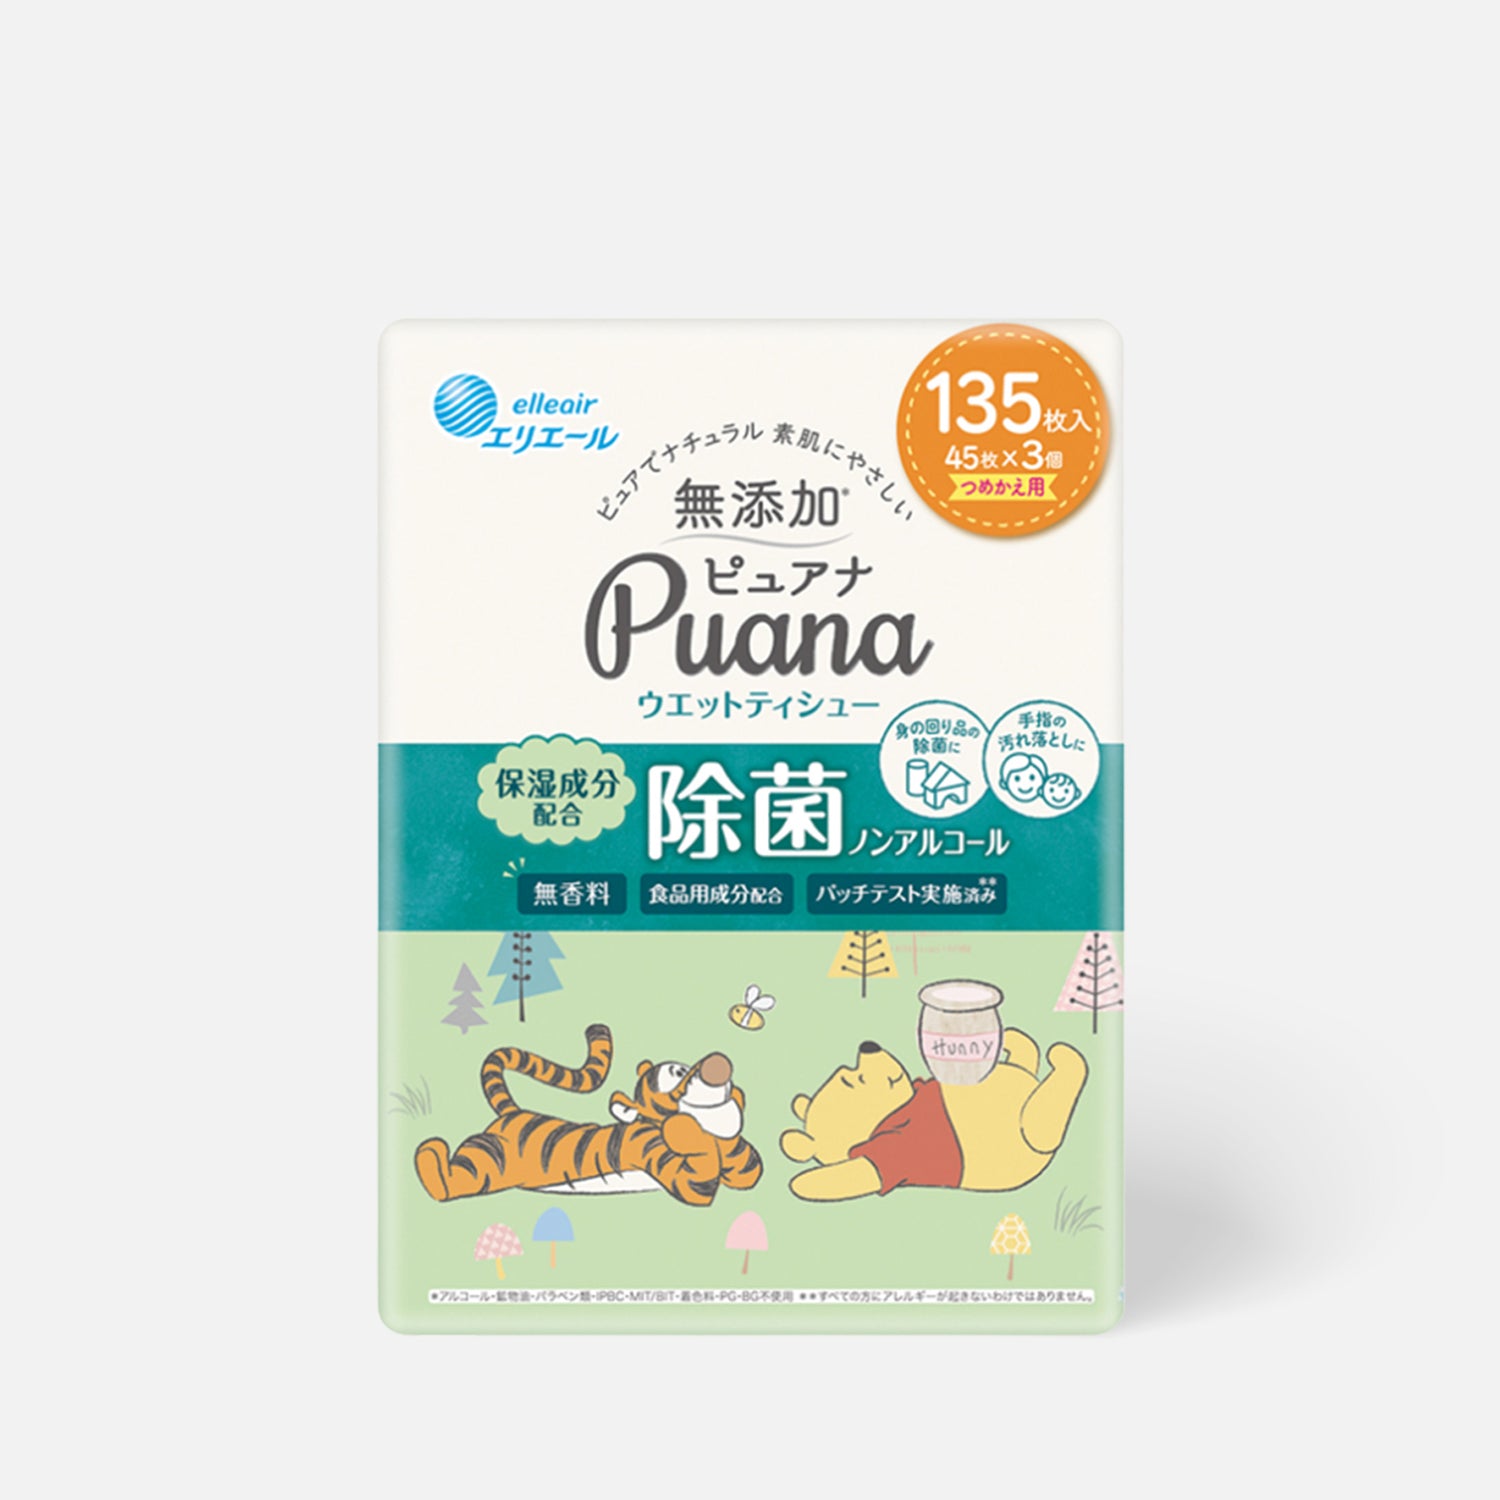 Elleair Puana-Wet Tissue-Antibacterial Non-Alcohol Type-135 sheets